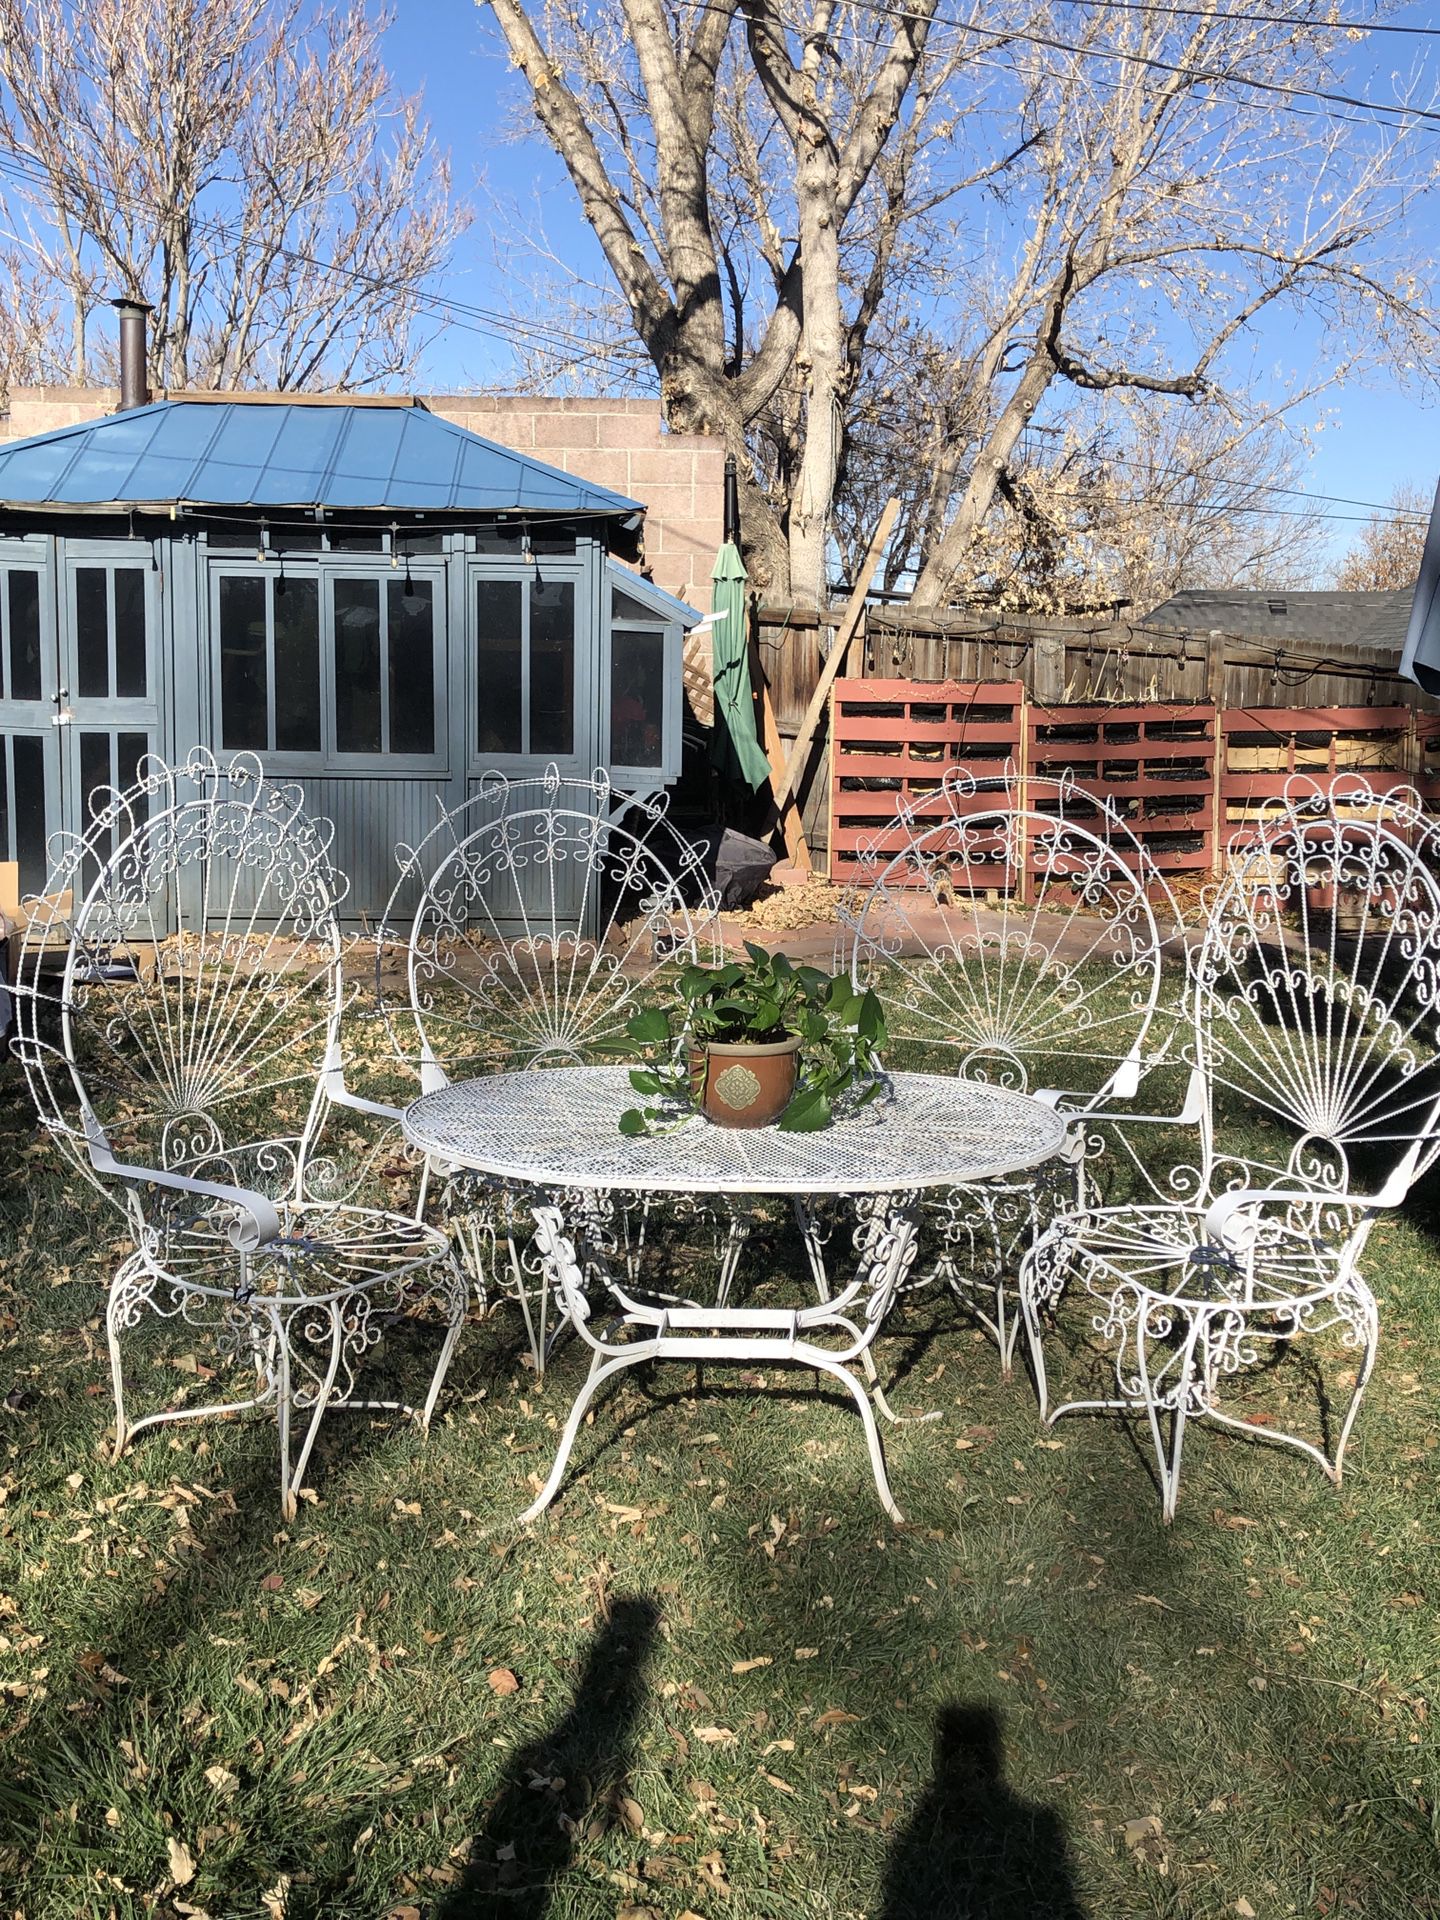 Vintage Peacock Style Chairs and table